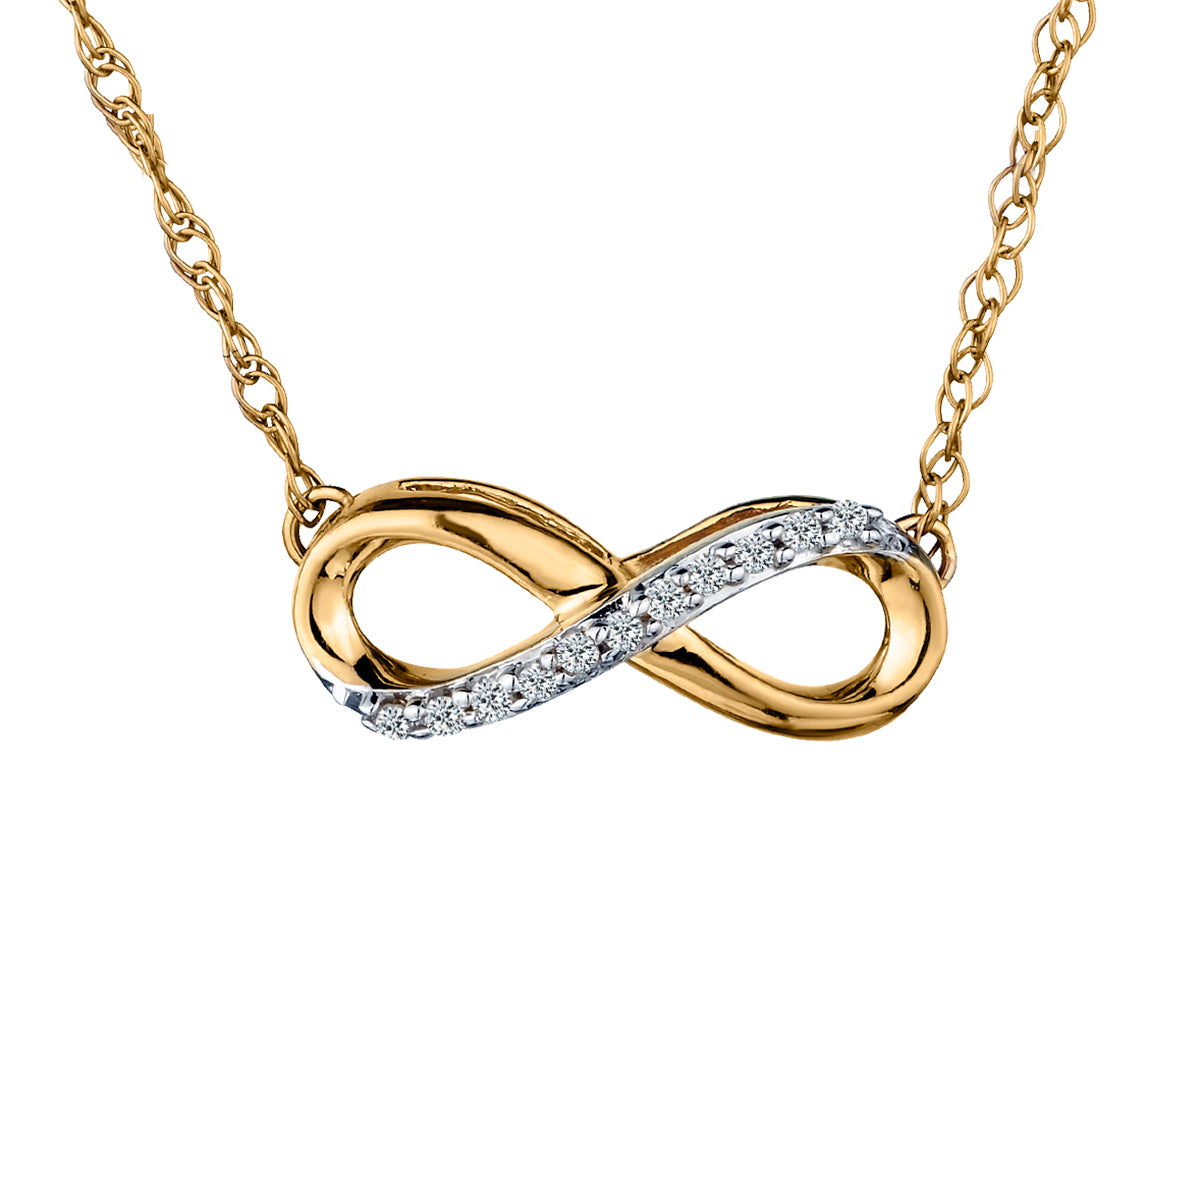 .05 Carat Diamond Infinity Necklace, 10kt Yellow Gold.......................NOW